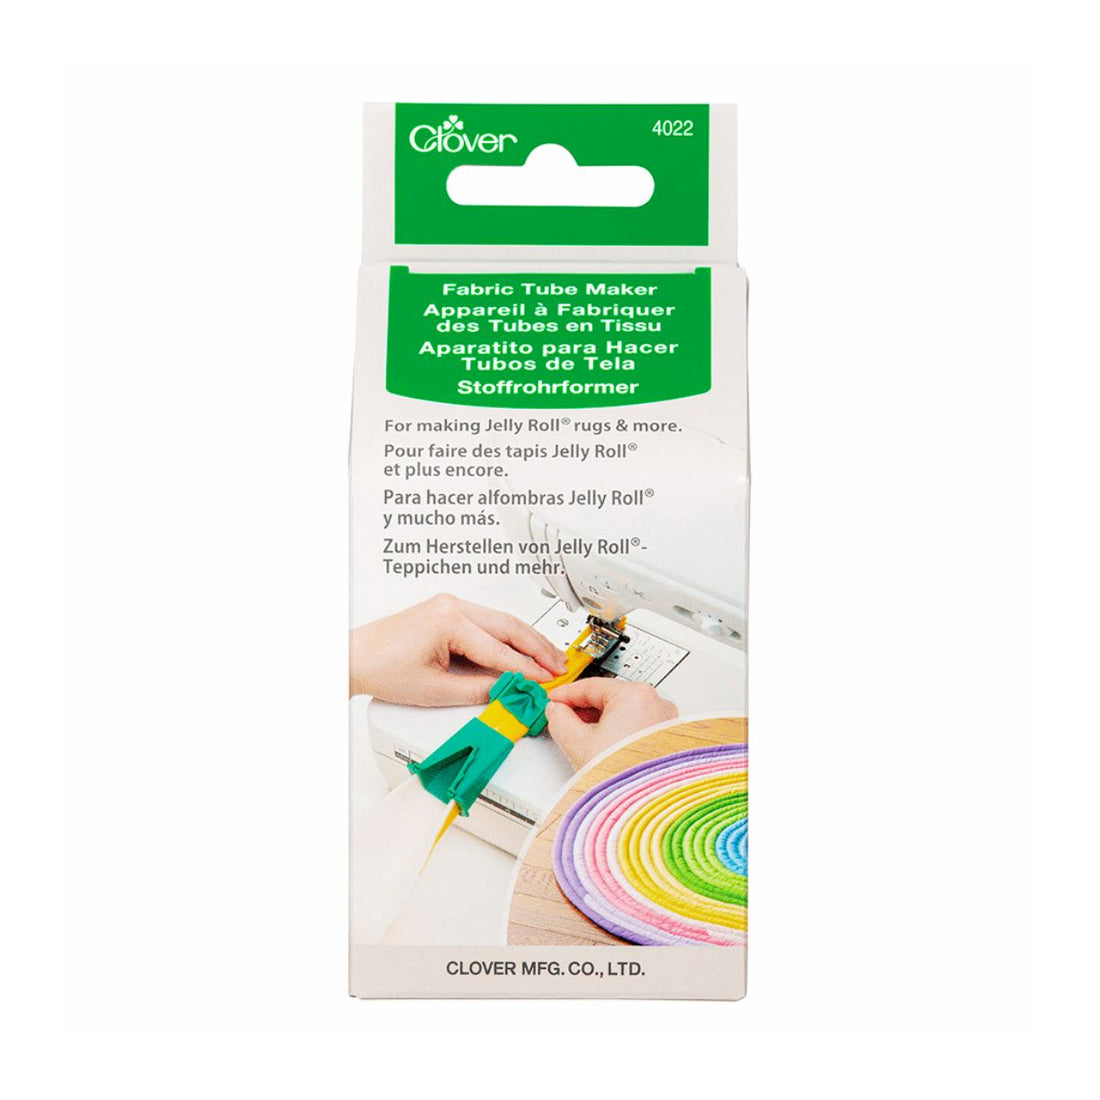 clover fabric tube maker for quilting and crafts